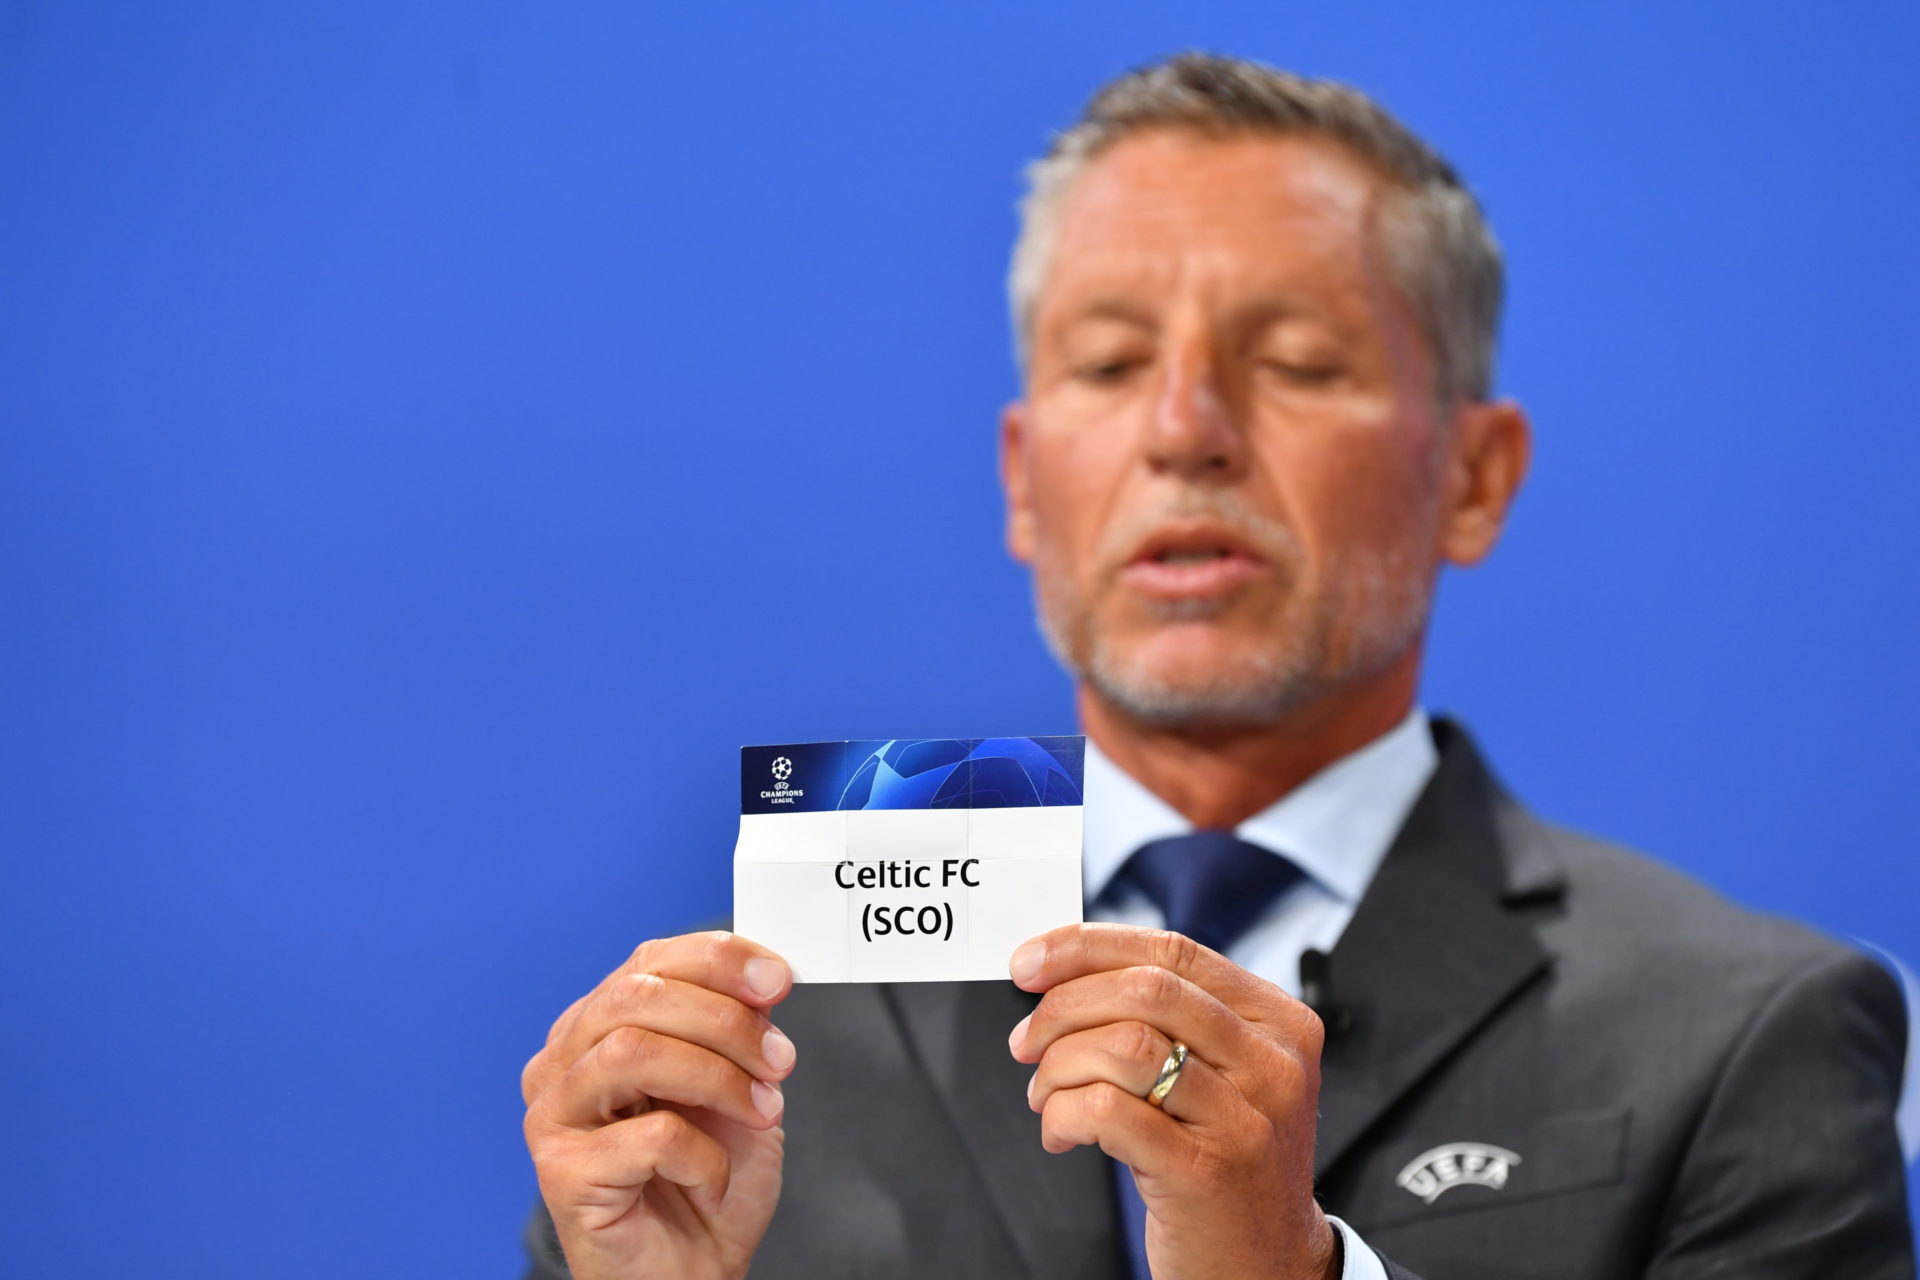 UEFA Champions League 2020/21 First Qualifying Round Draw